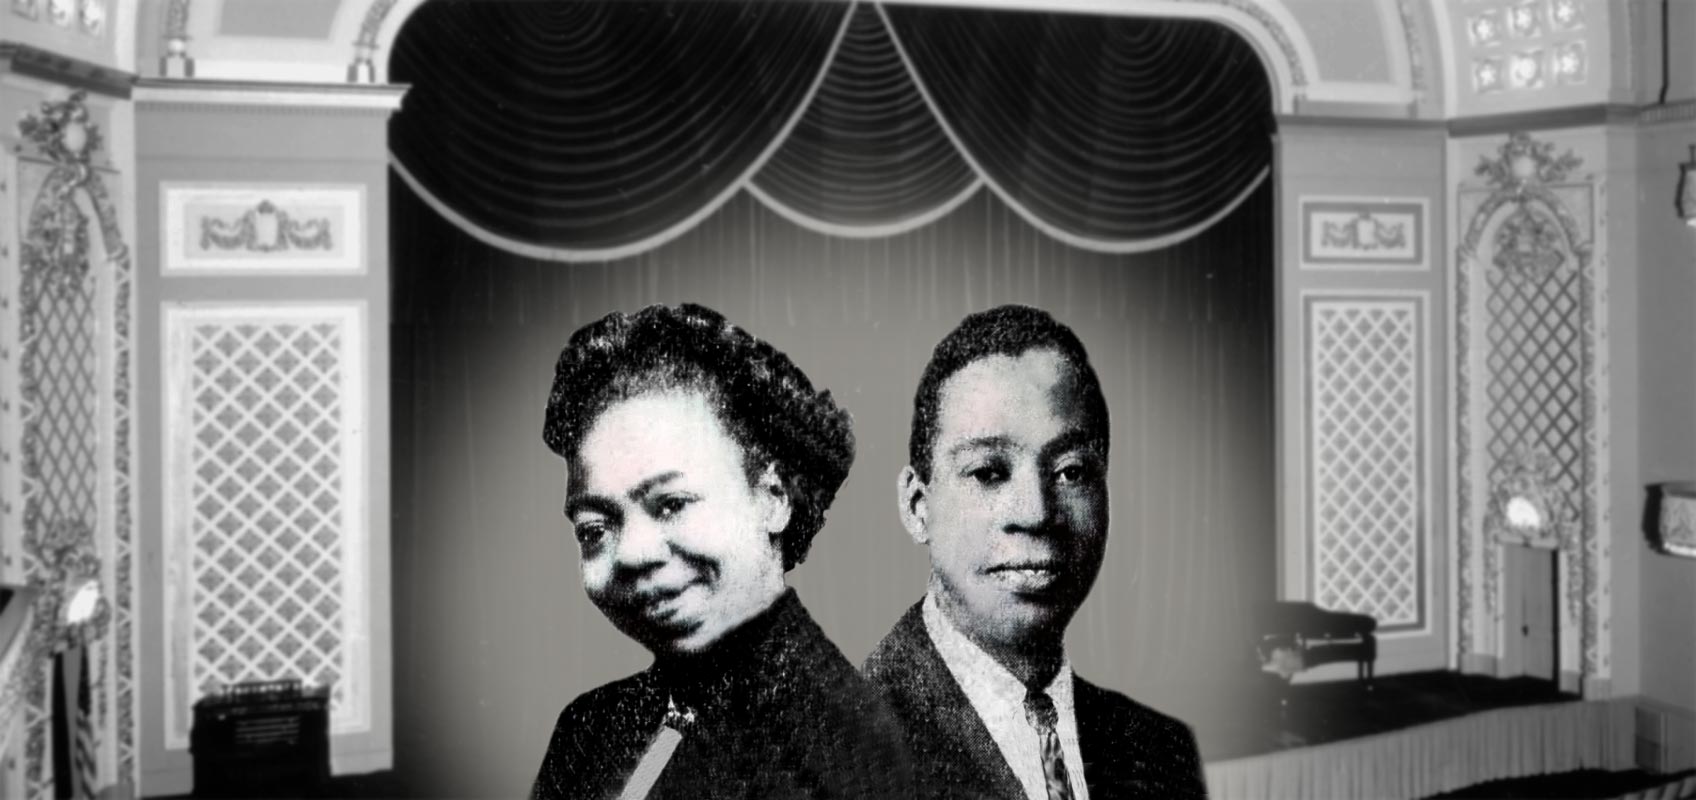 Estelle Cavanaugh Rowe and Wade Mann - the First Local Black Soloists with the Cincinnati Symphony Orchestra